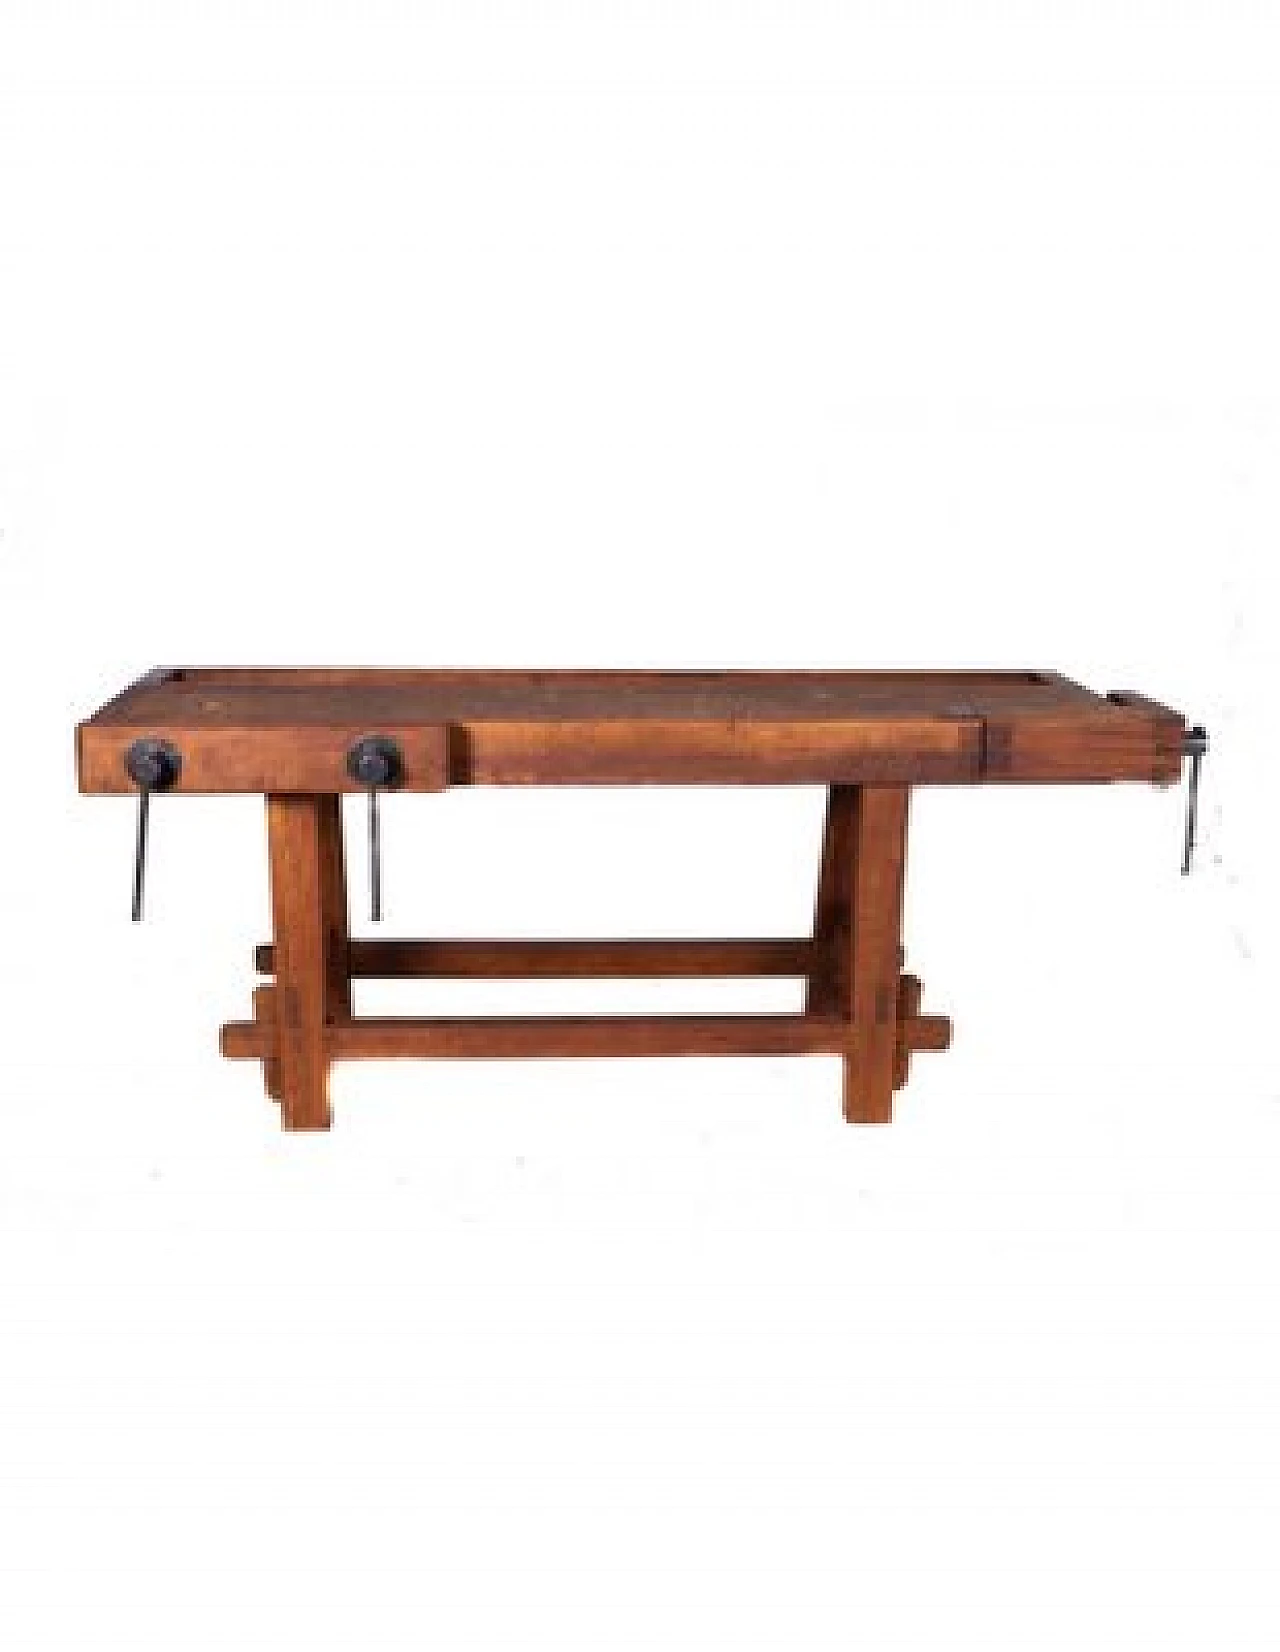 Solid wood and cast iron carpenter's bench 3